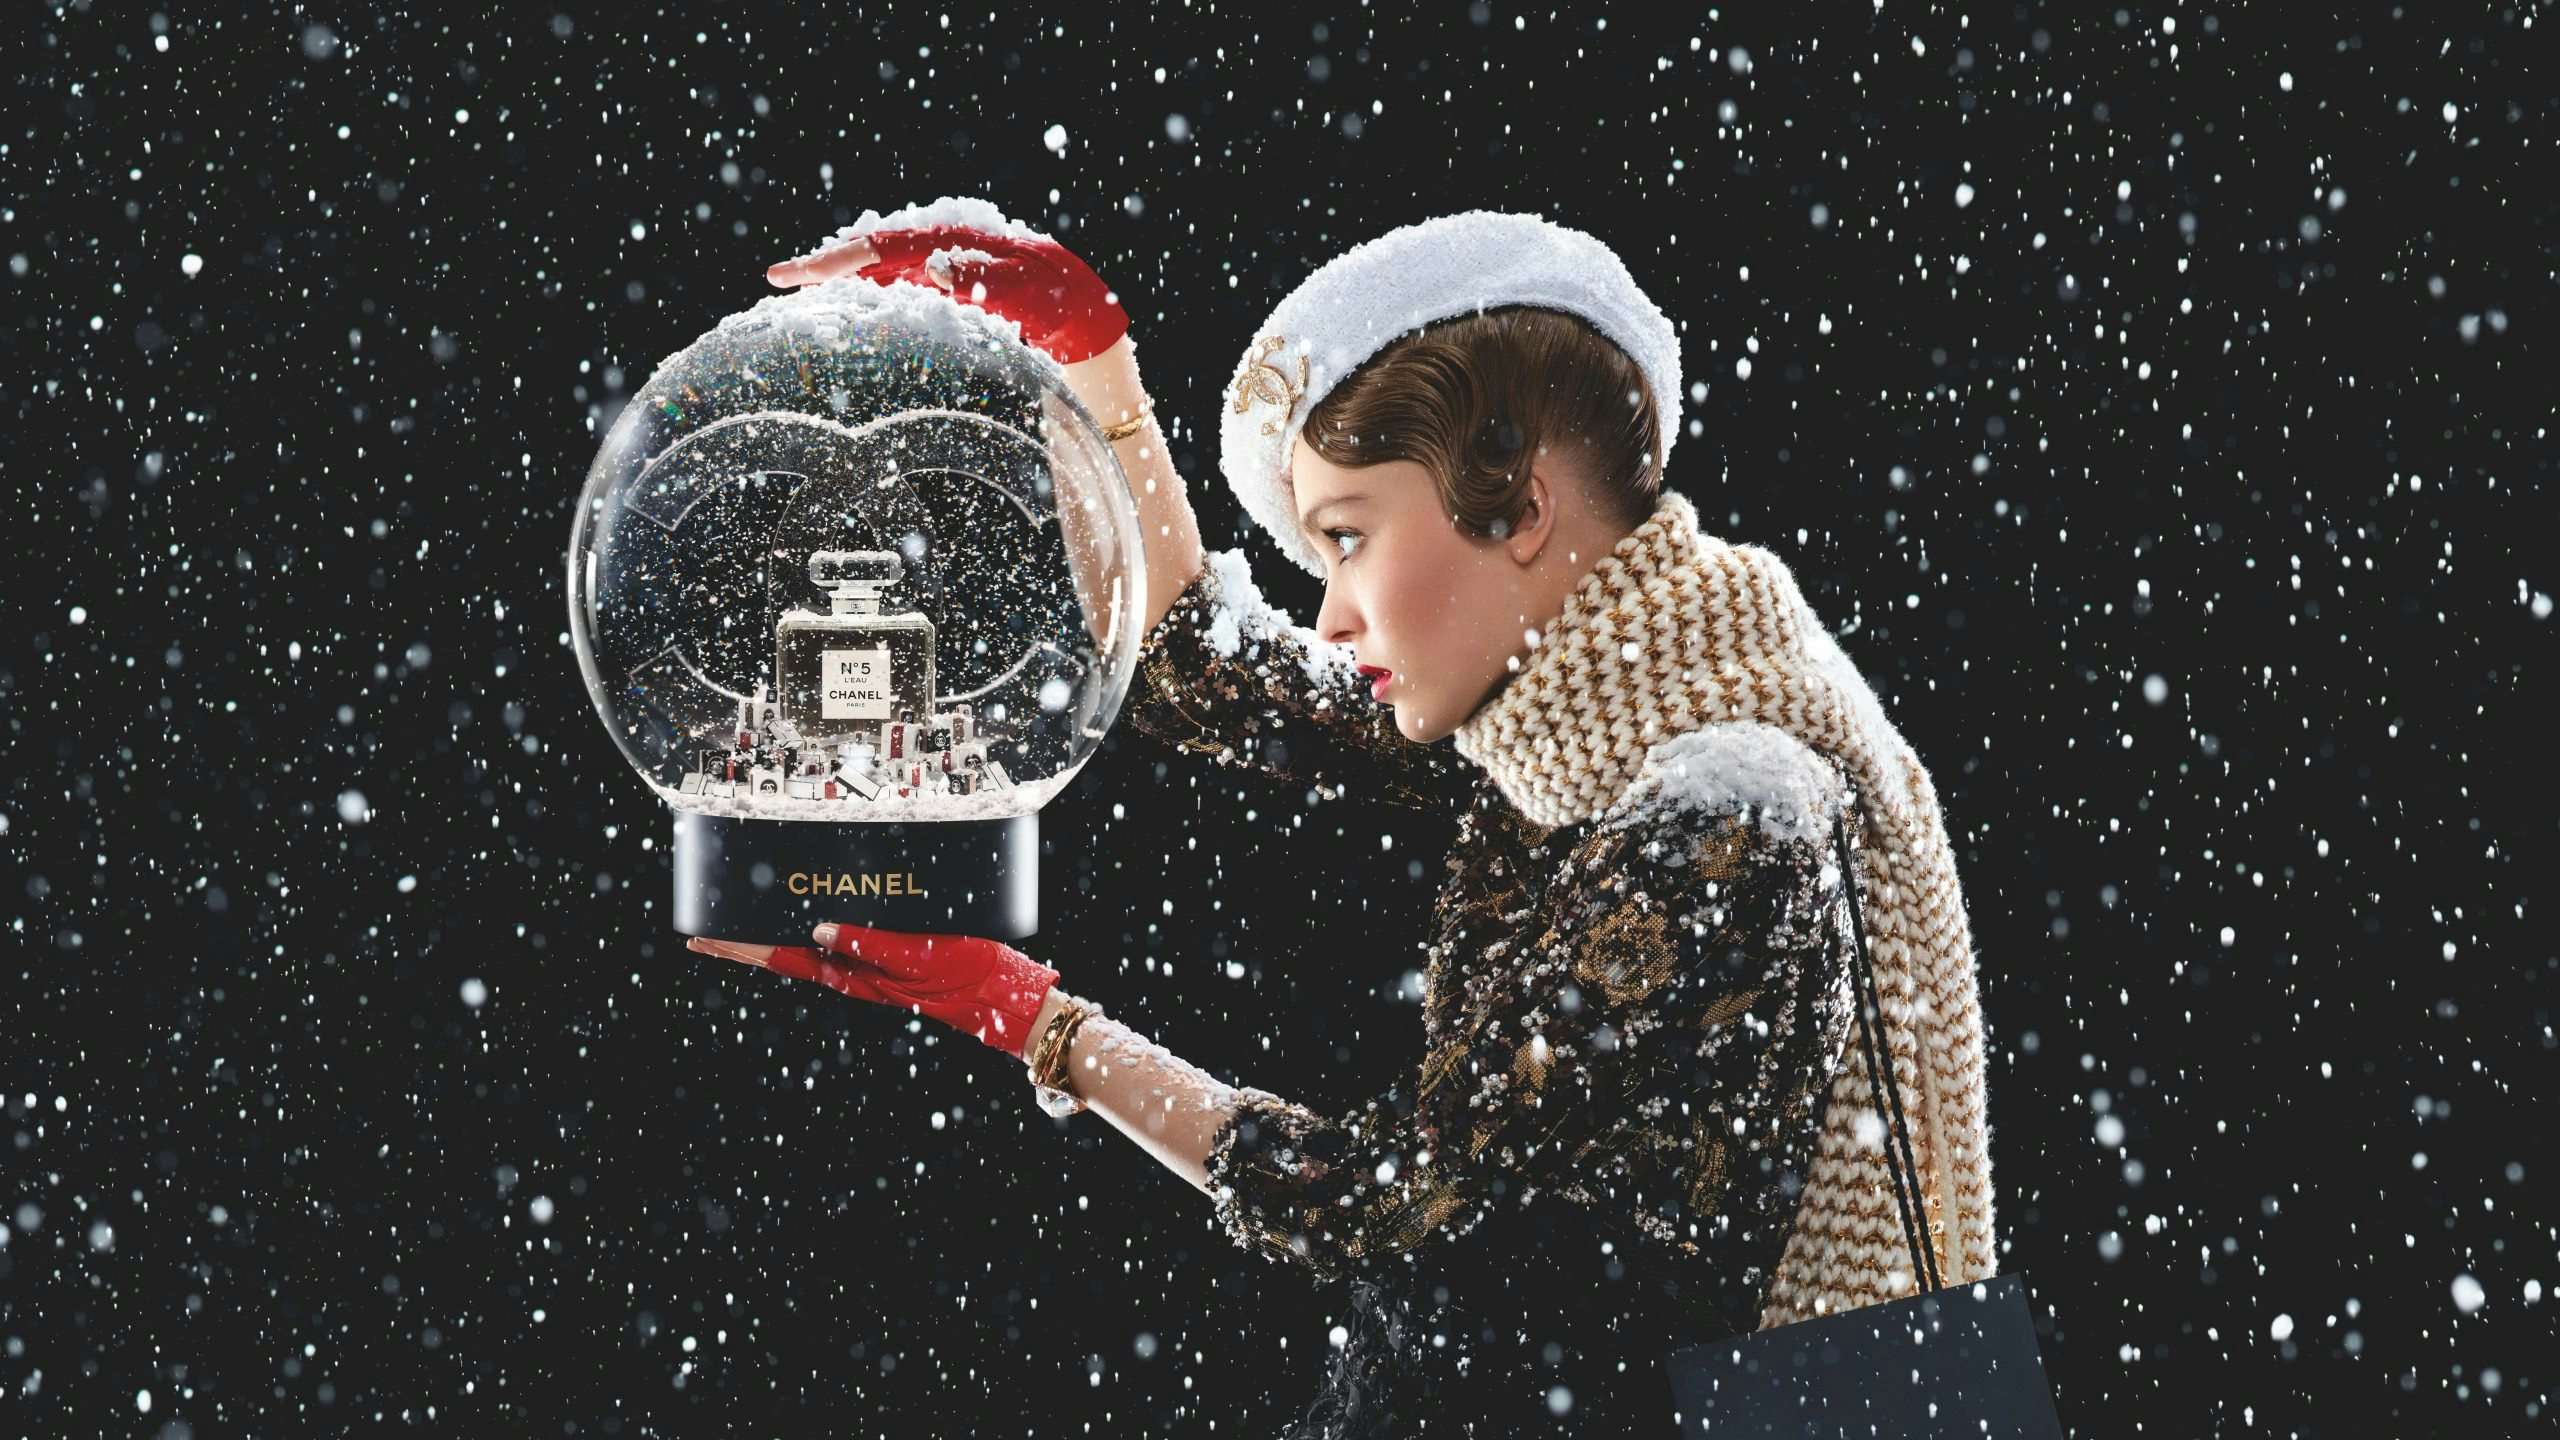 McKinsey & Co. surveyed over 3,500 shoppers for its 2020 Holiday Season report, which shows some surprising shifts in this year’s consumer behavior. Photo: Chanel
